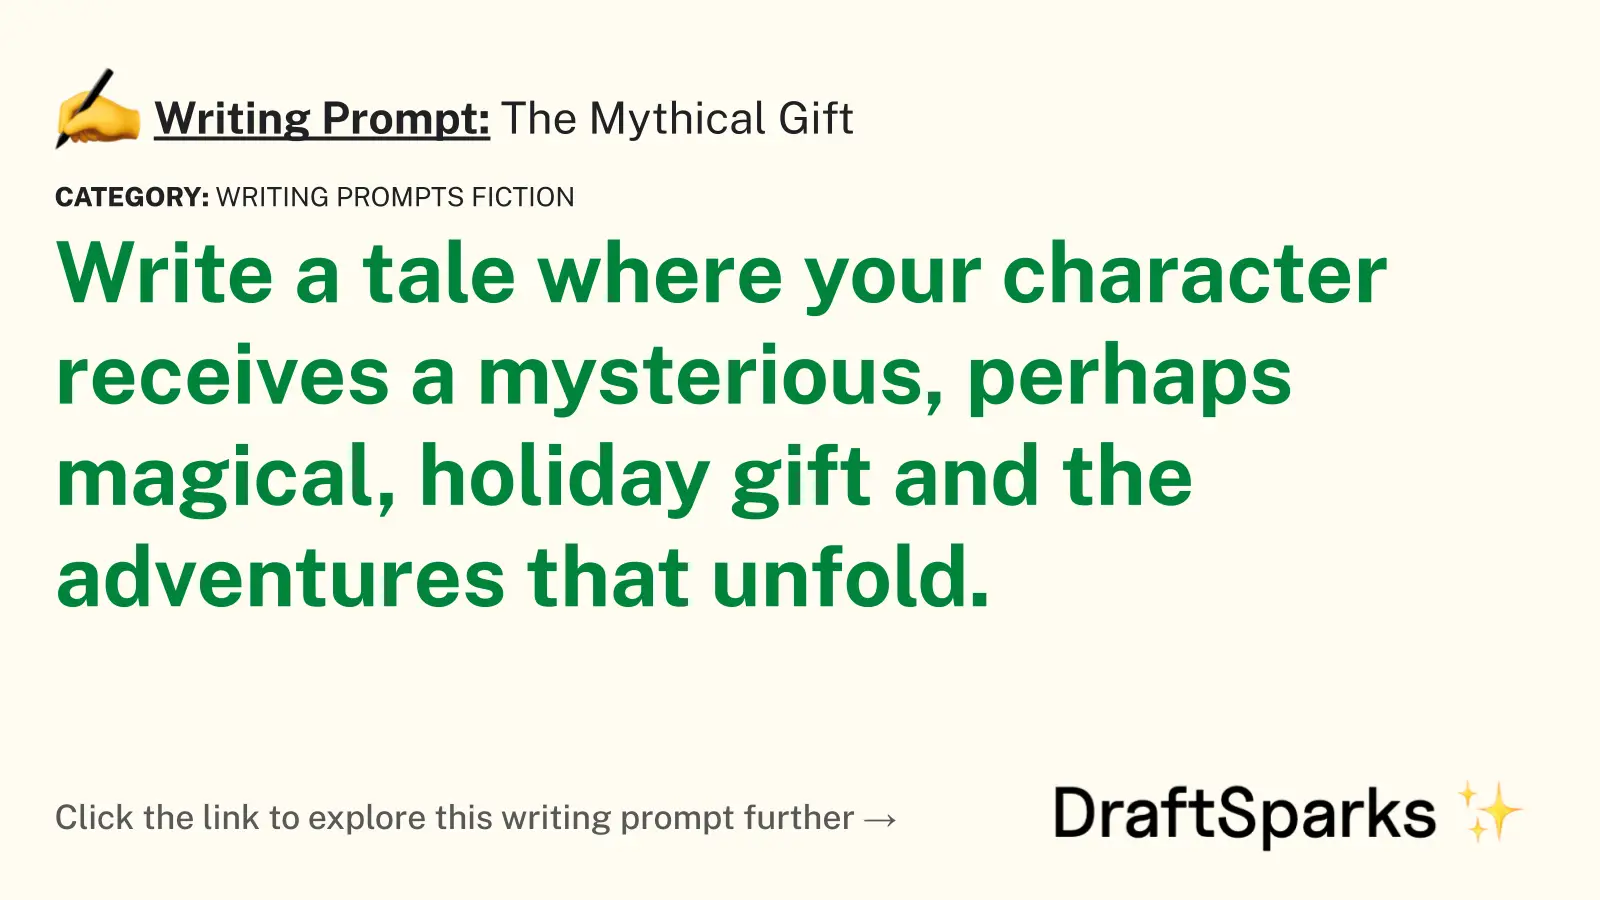 The Mythical Gift